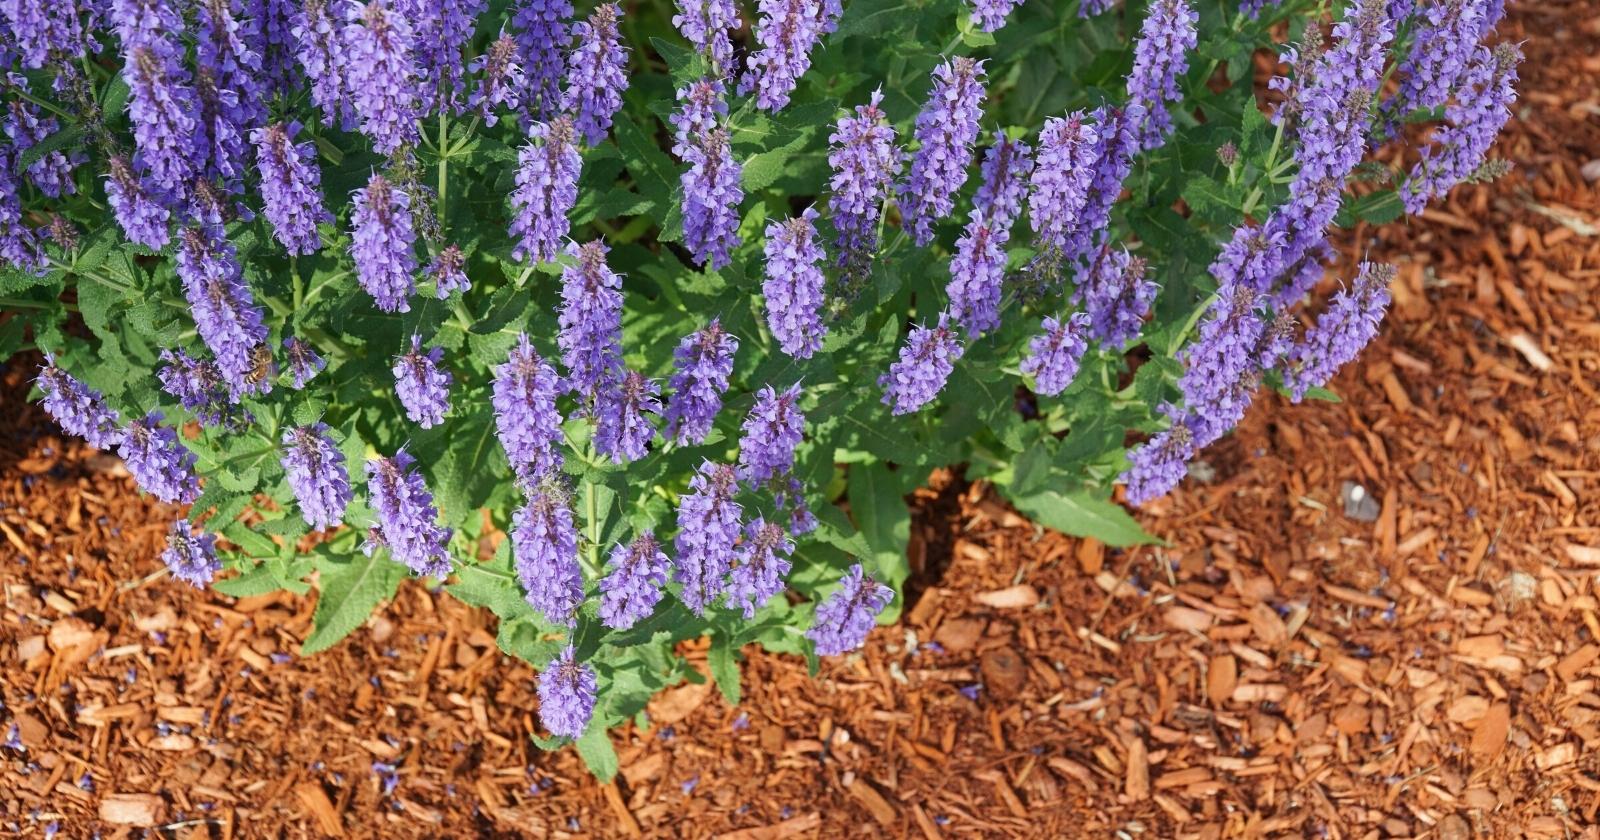 Large green bush with purple flowers surrounded by wood chips and mulch.